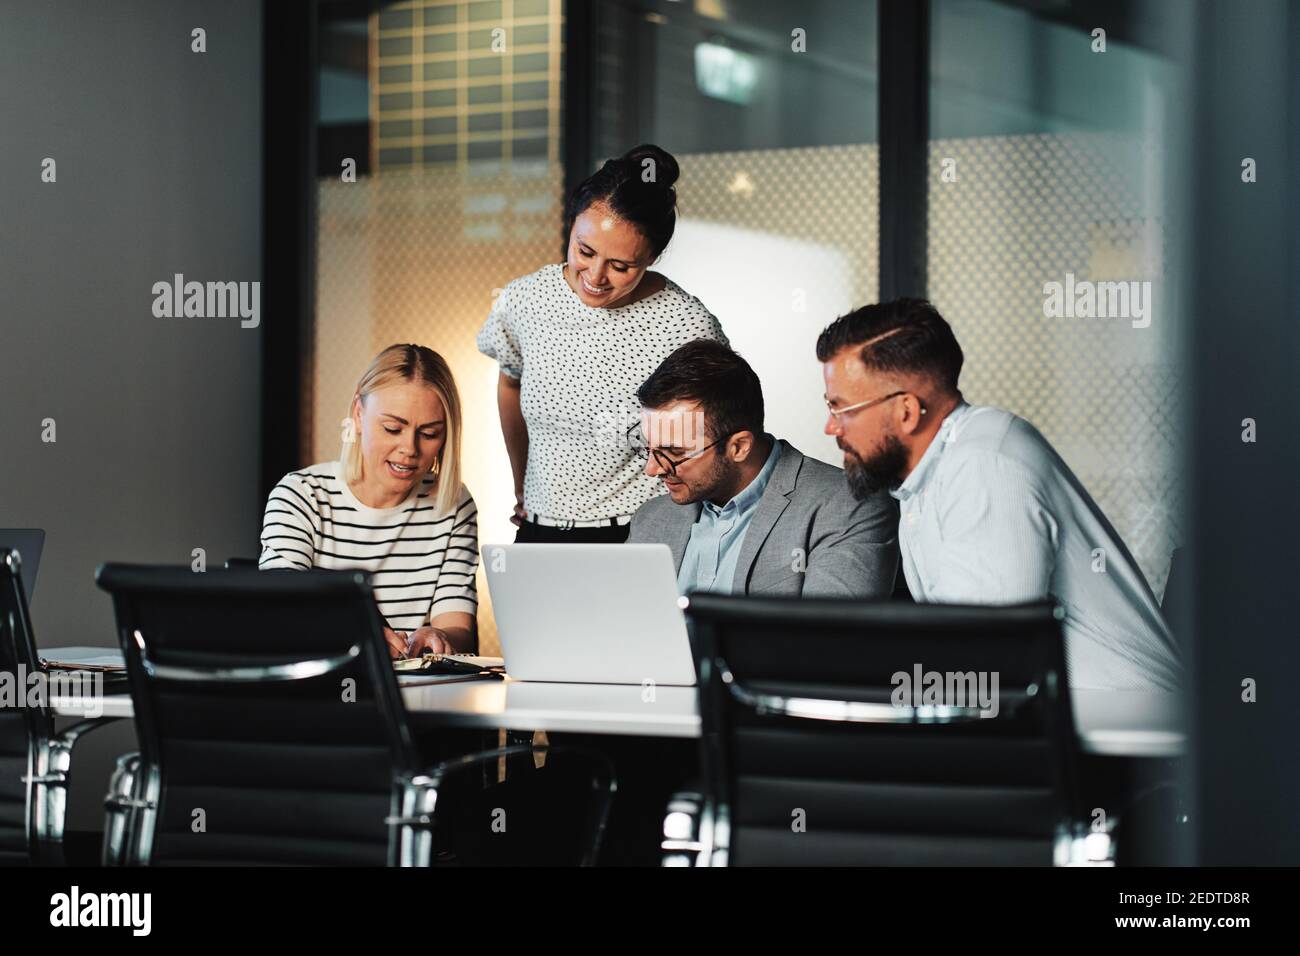 Group of smiling businesspeople working together on a laptop and discussing paperwork at a table during a meeting in an office boardroom Stock Photo